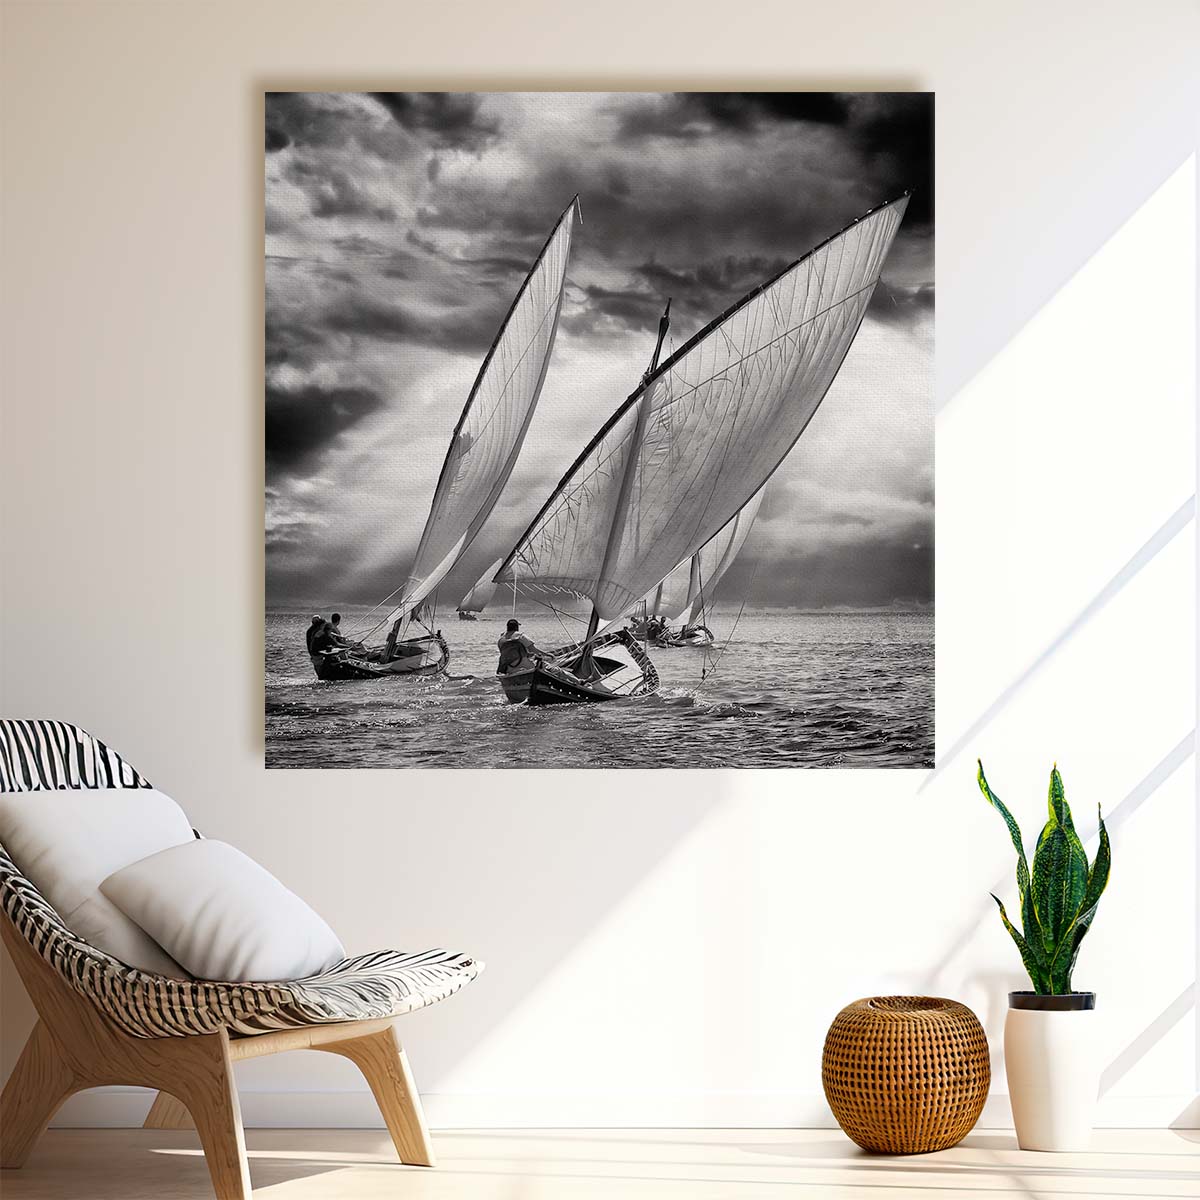 Monochrome Sailboat Race Seascape Ocean Photography Wall Art by Luxuriance Designs. Made in USA.